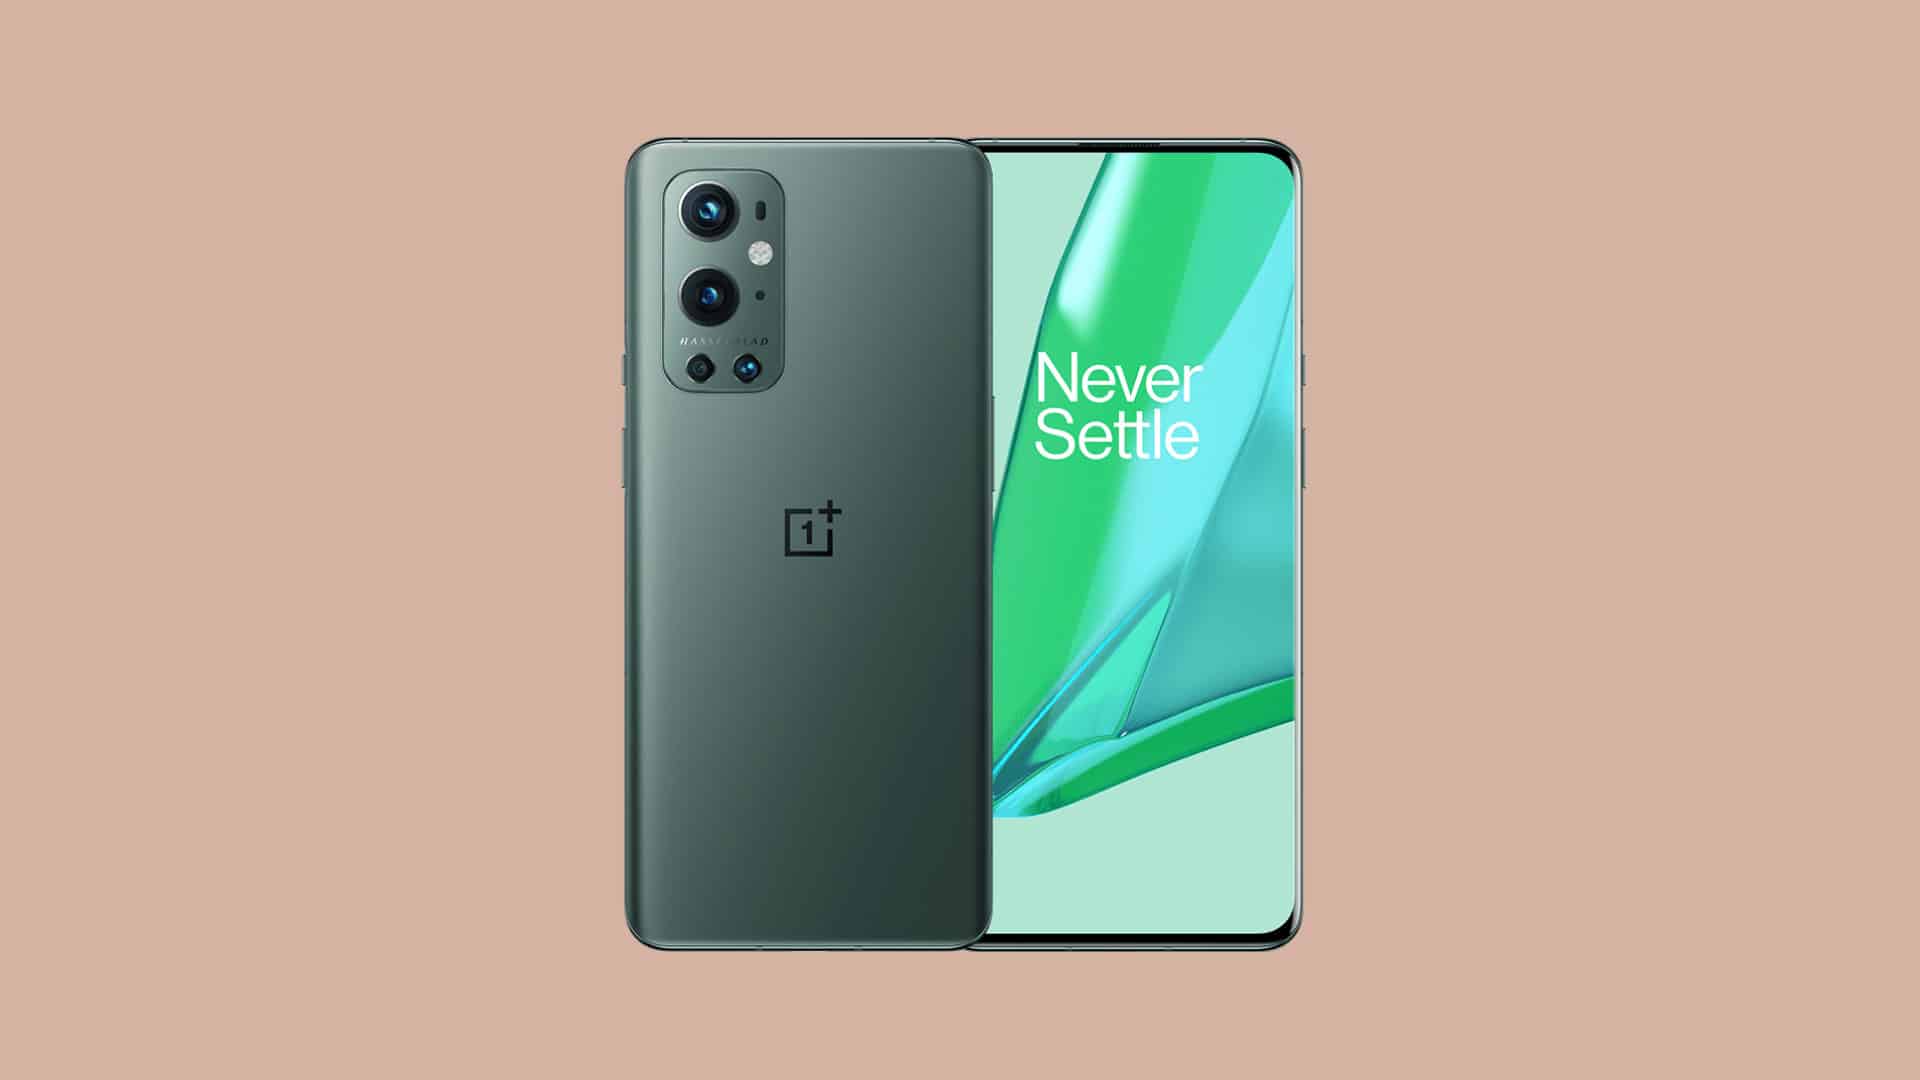 OxygenOS 11.2.5.5 - OnePlus 9 / 9 Pro May 2021 update